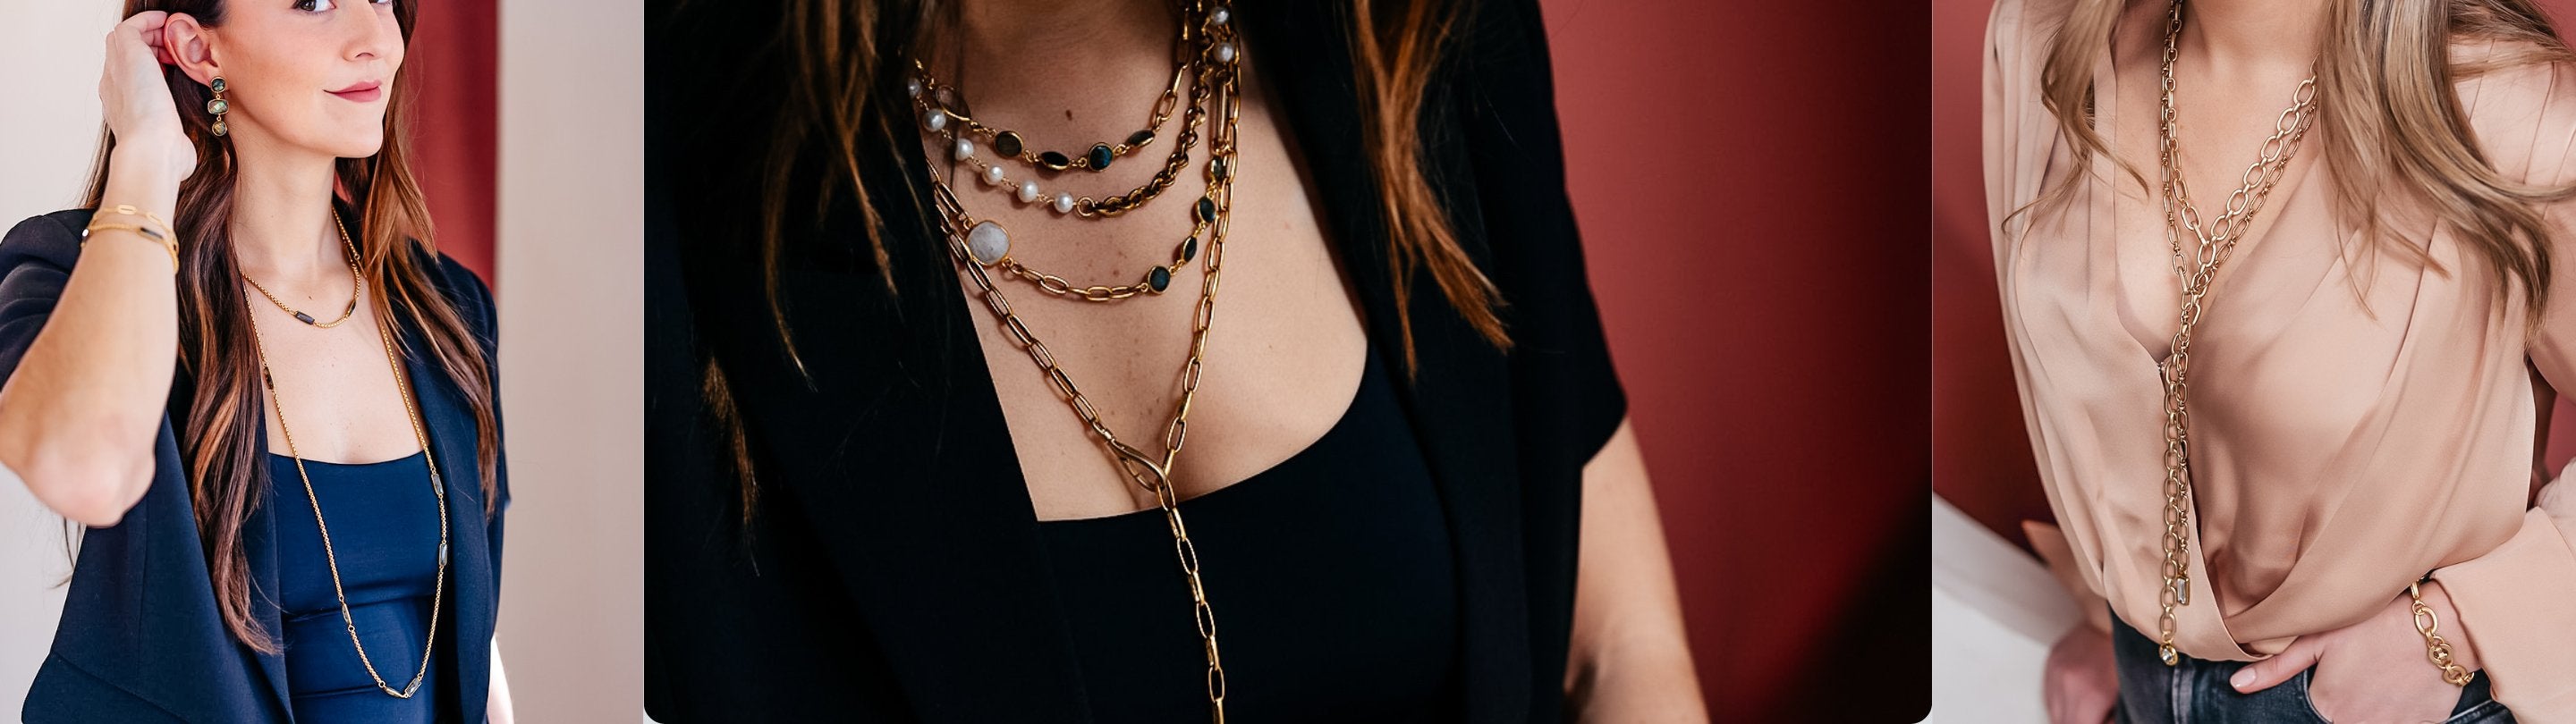 Long Necklaces | Womens Long Necklaces Online | SHEIN